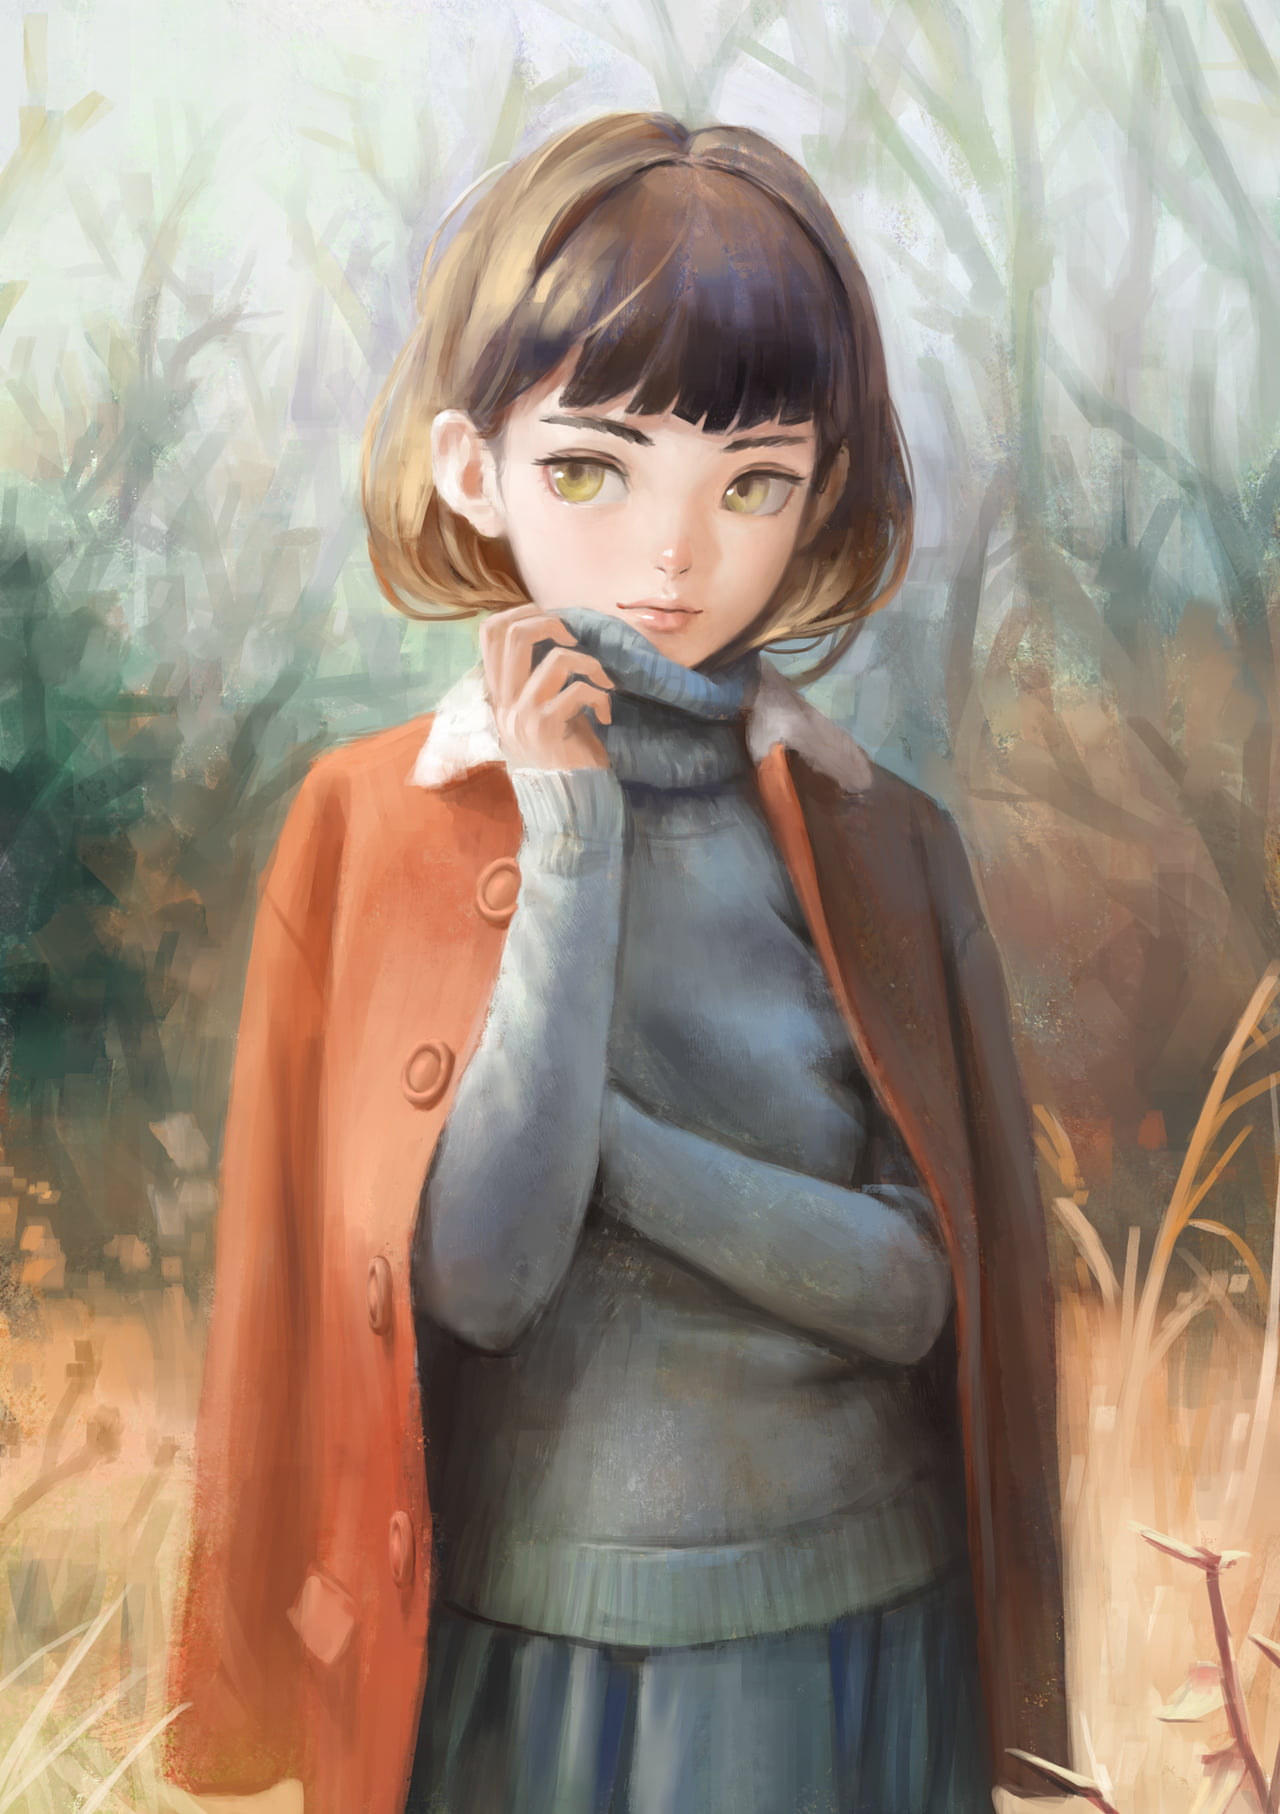 Female anime character with brown jacket illustration, original